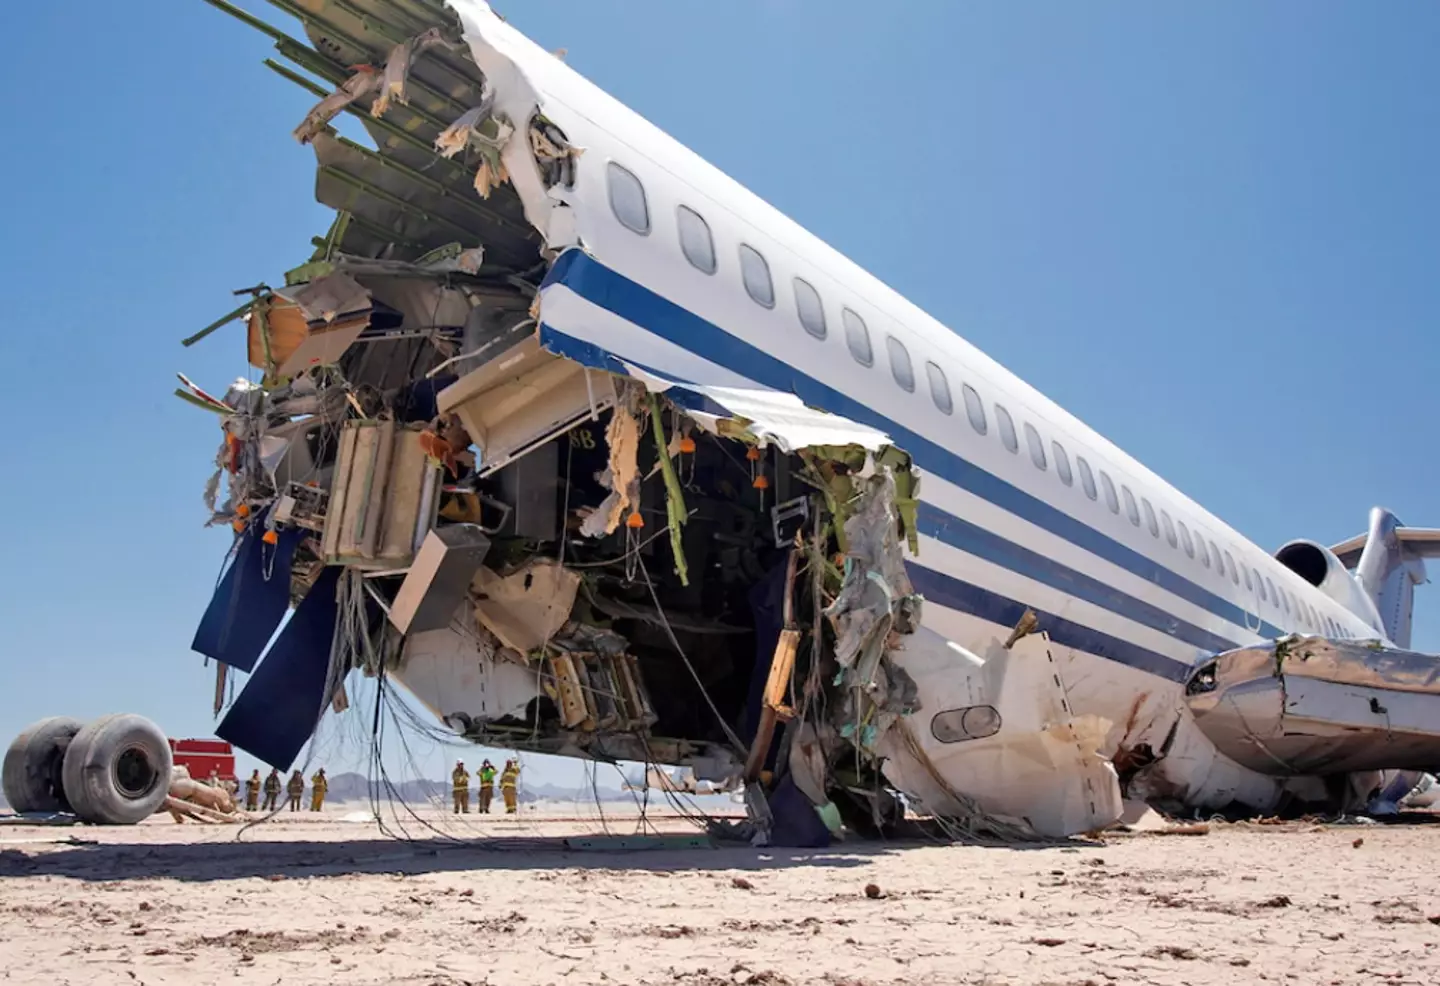 The experiment was looked into on Channel 4's The Plane Crash.